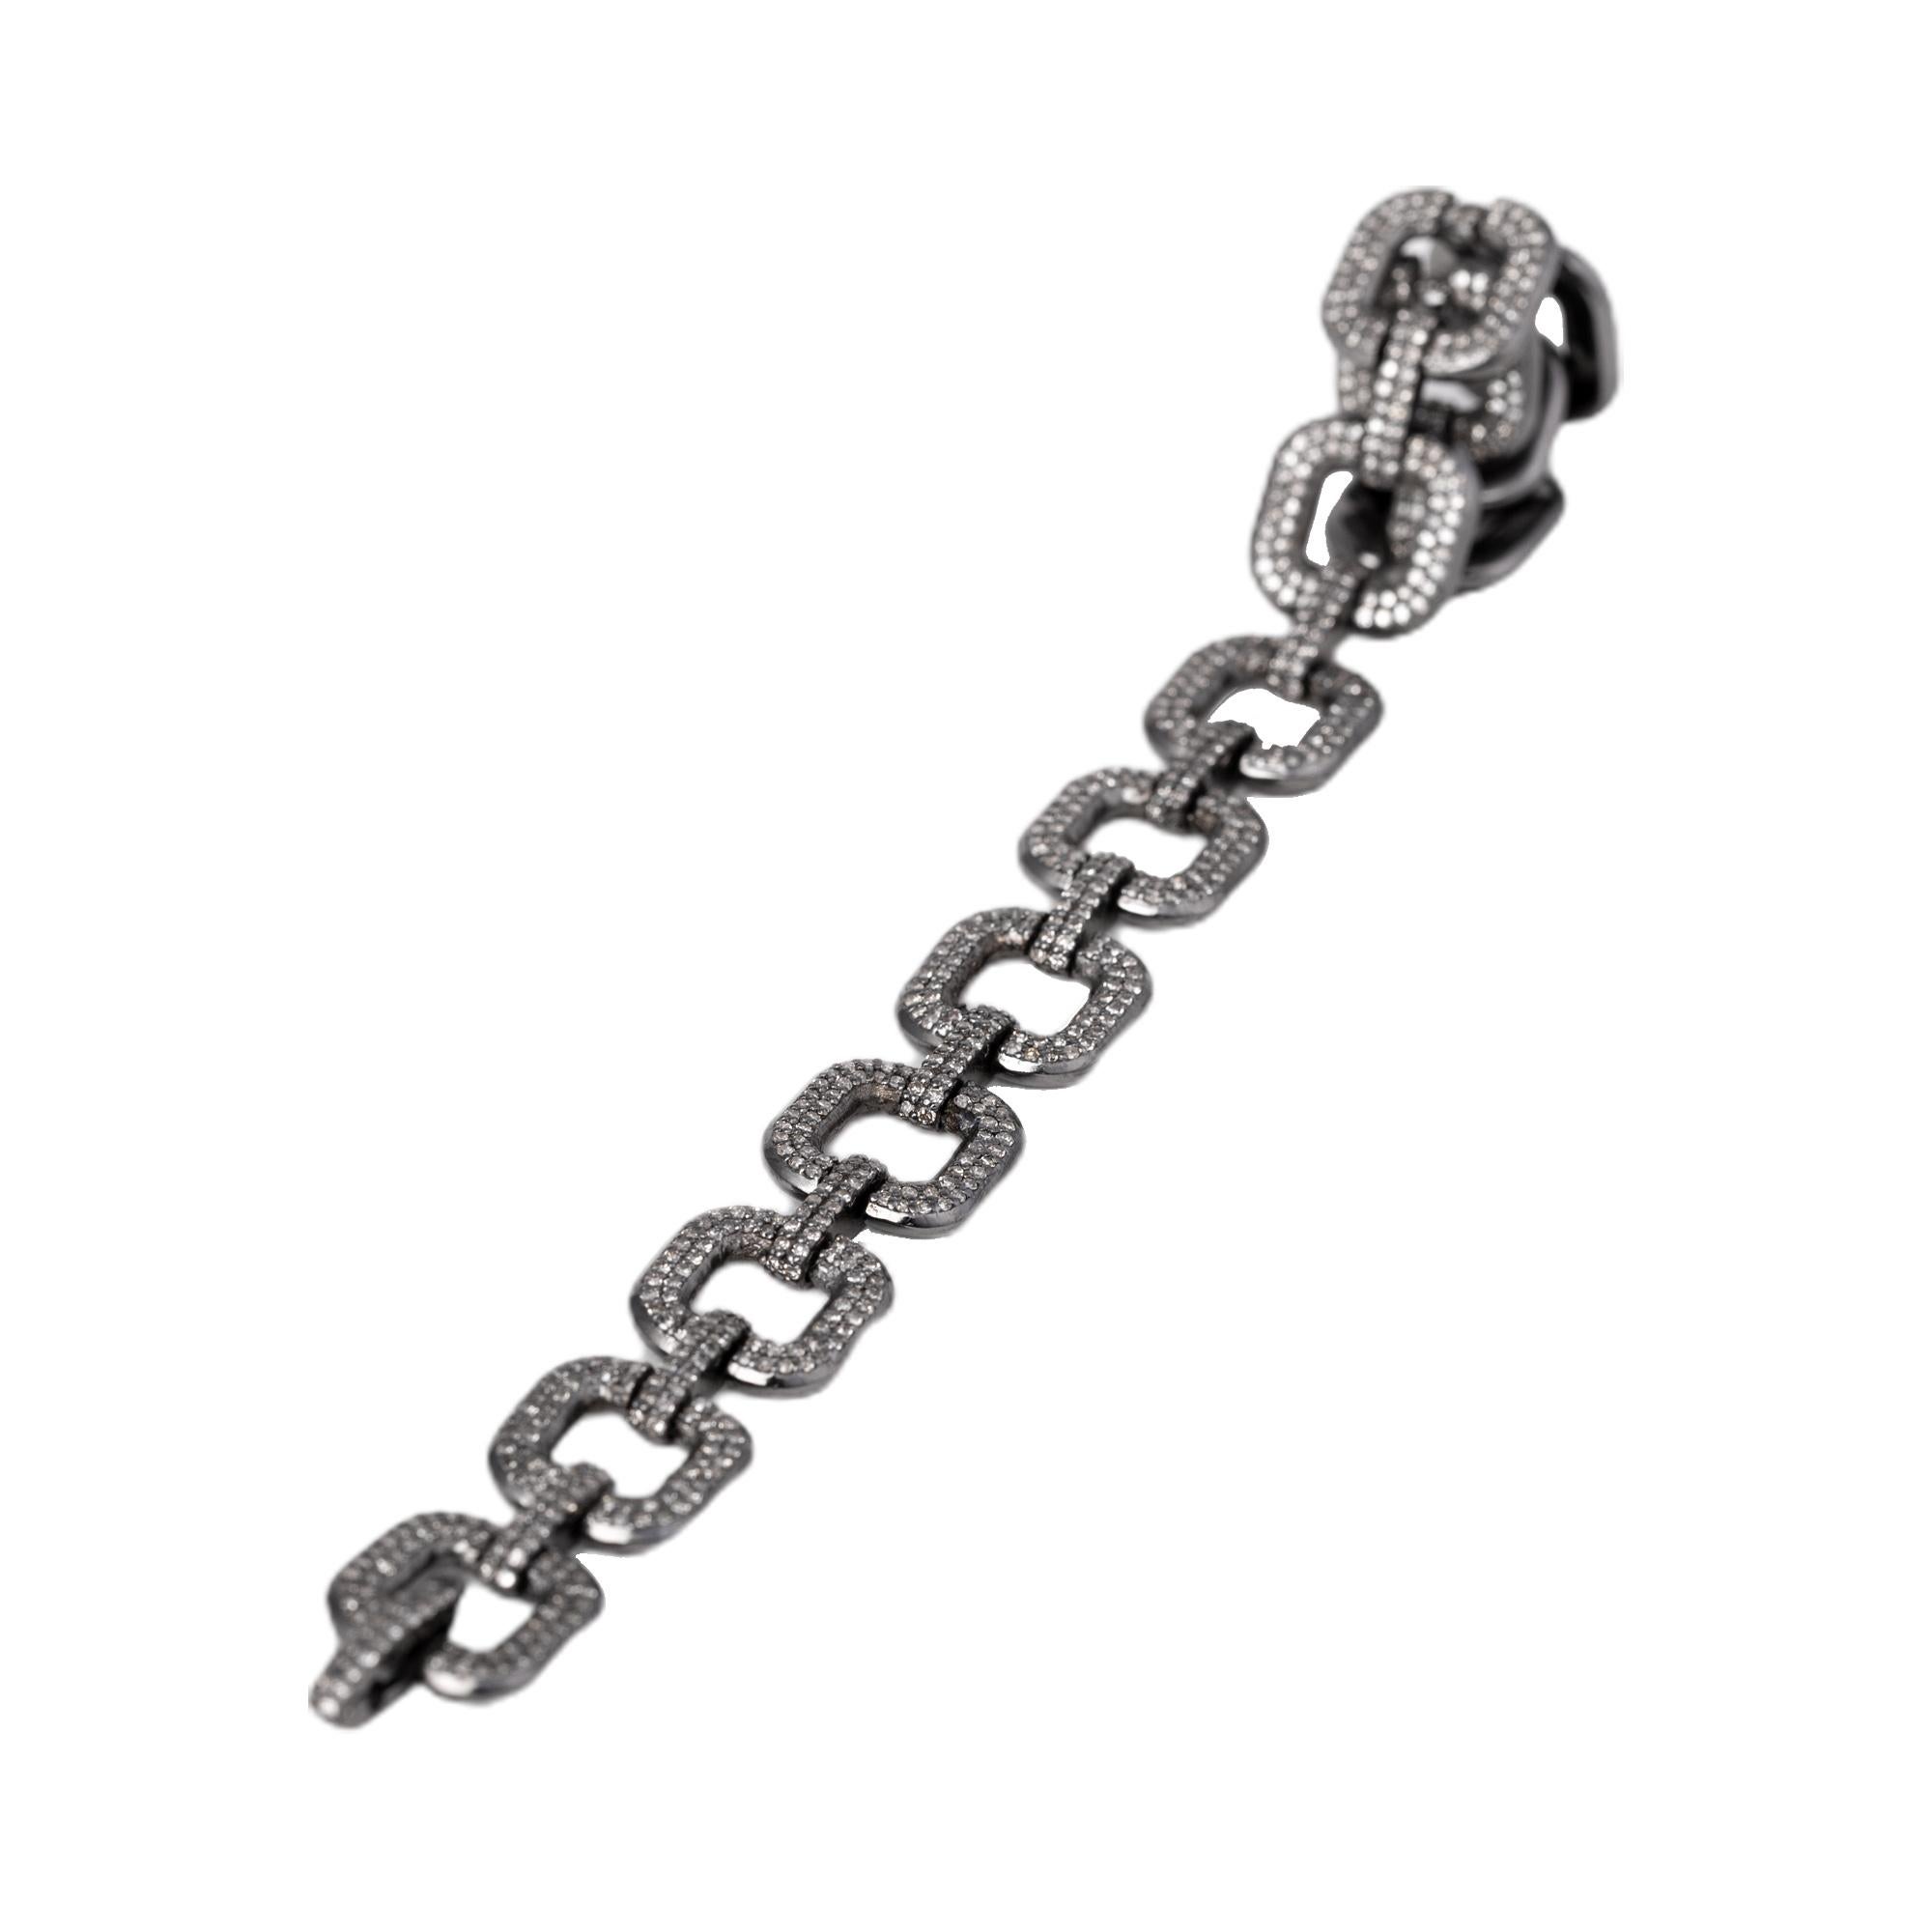 3.77 Carat Diamond Link Tennis Bracelet in Victorian Style

This Victorian era art-deco nouveau style diamond link bracelet is timeless. The cushionish-square hollow link is formed with two rows of pave set round diamonds. The two vertical rows of